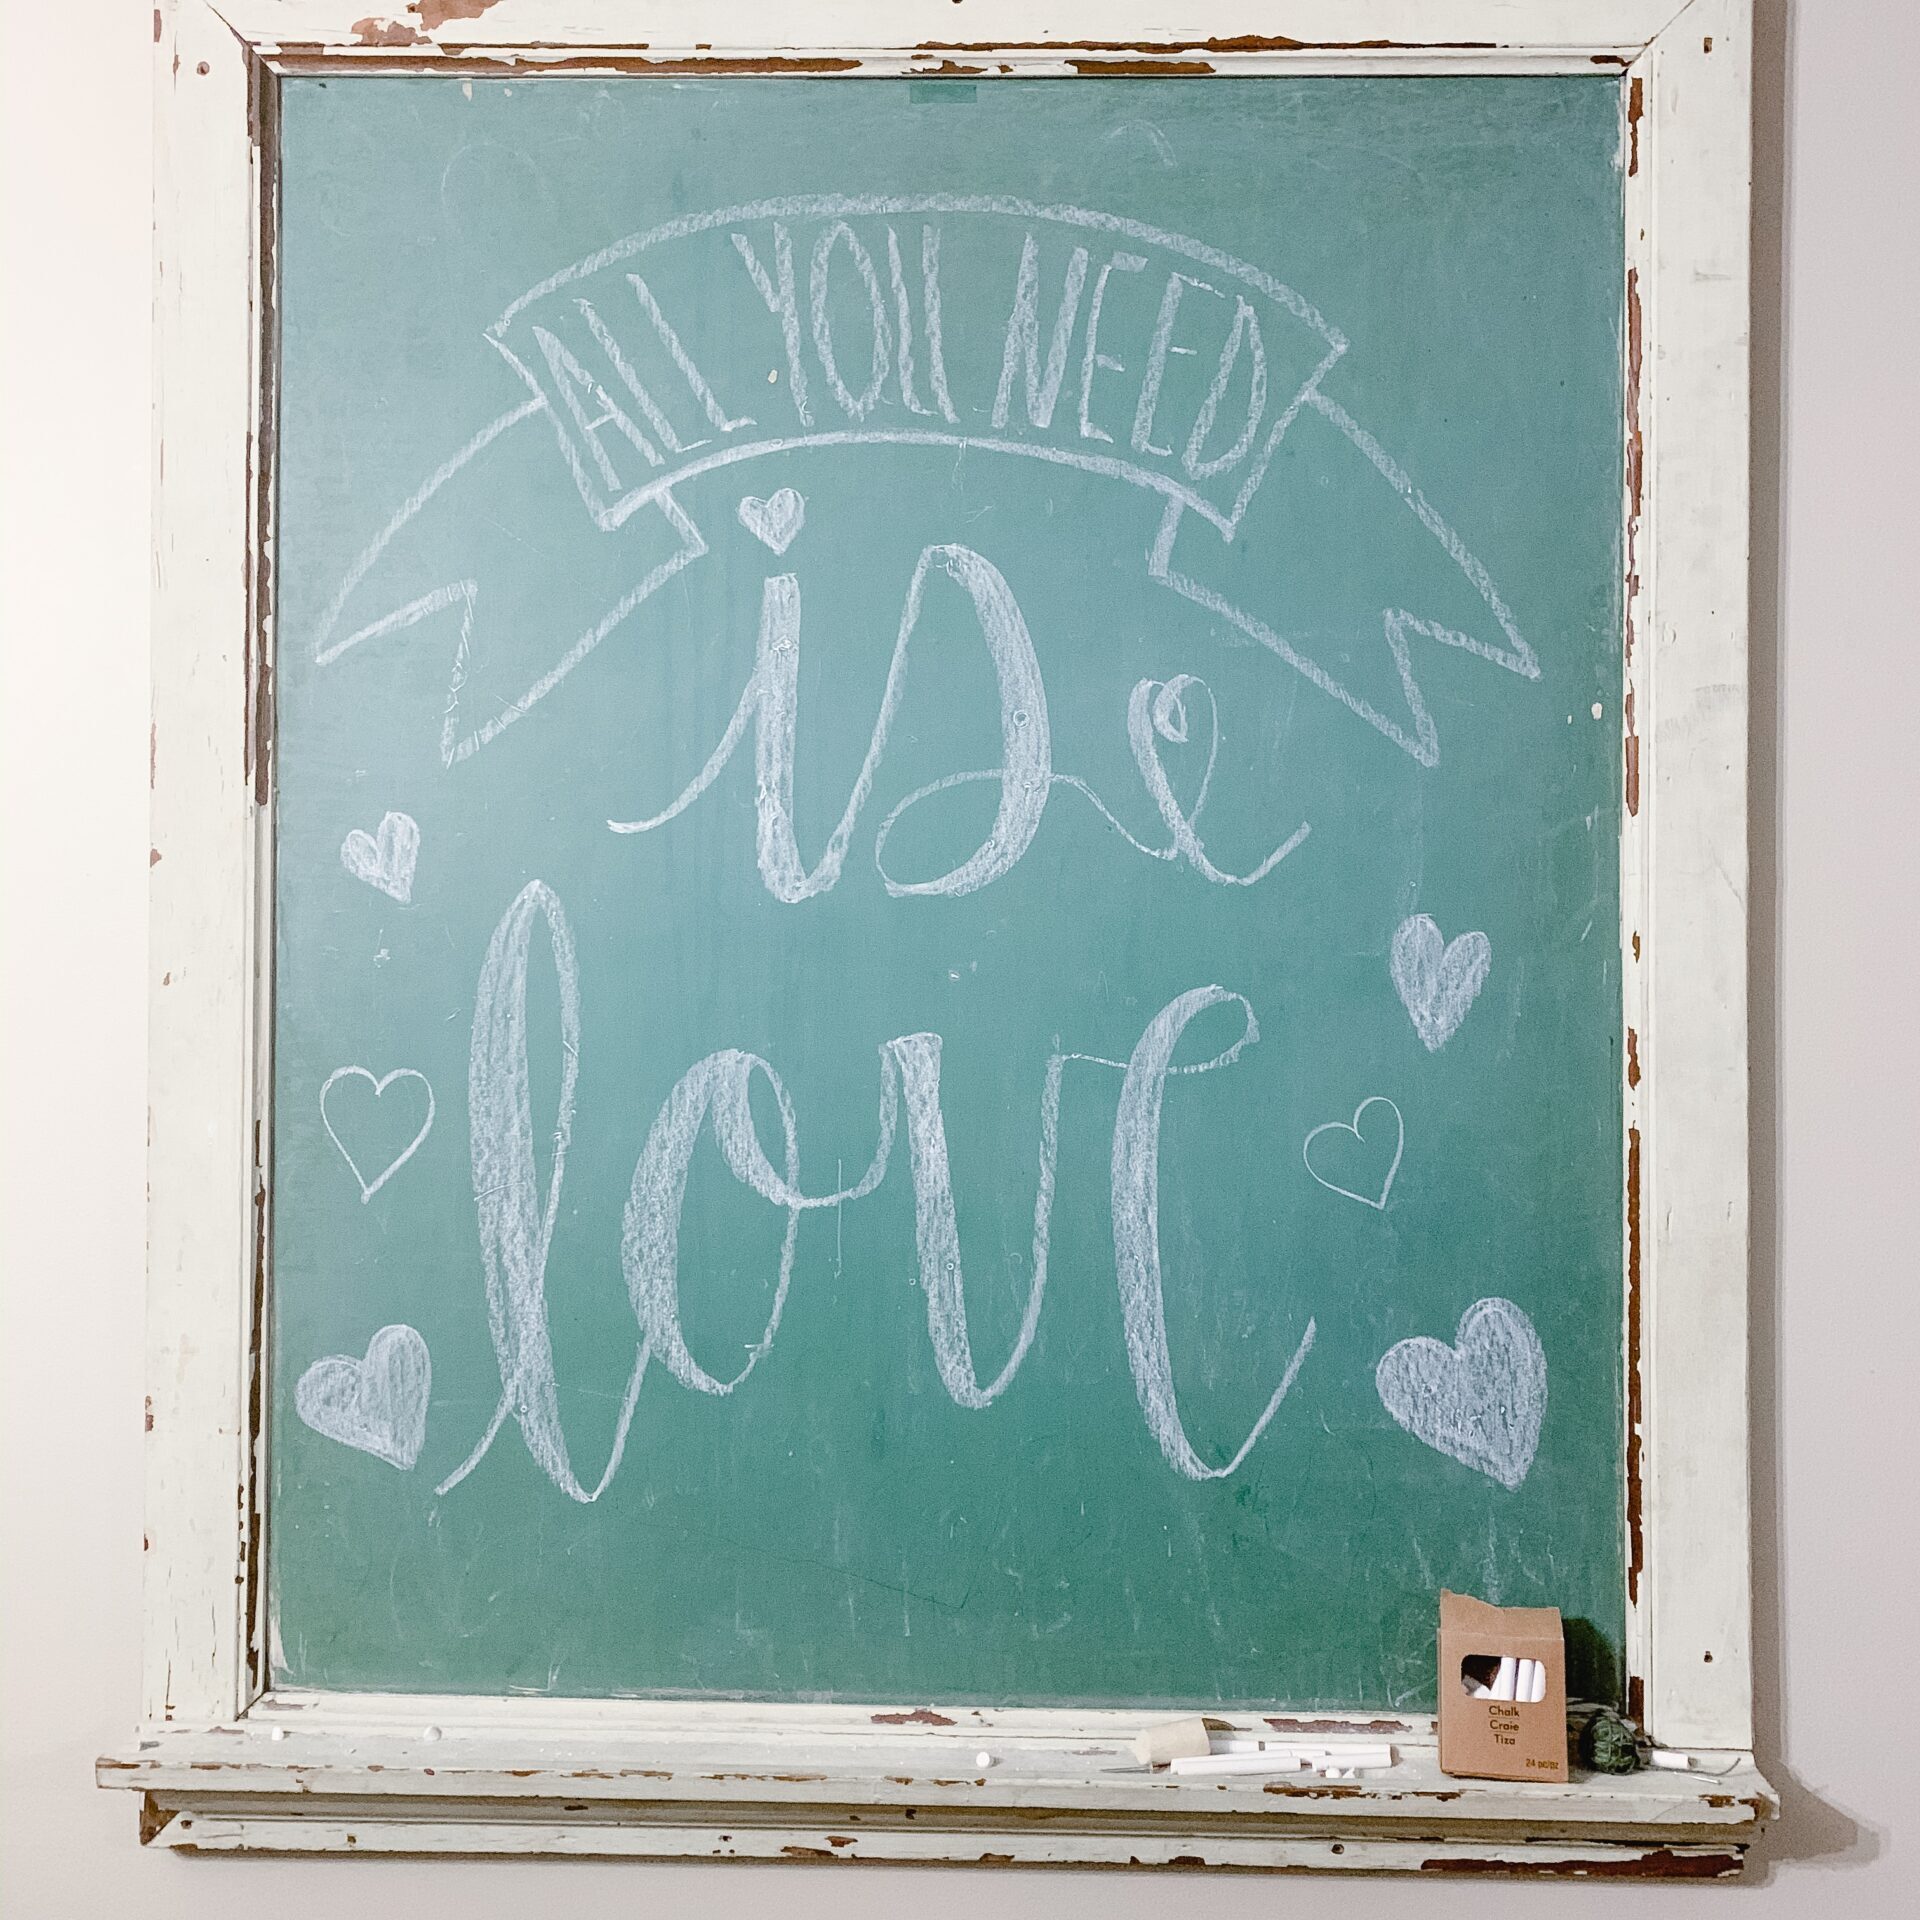 Antique chalkboard with All you need is love hand lettered